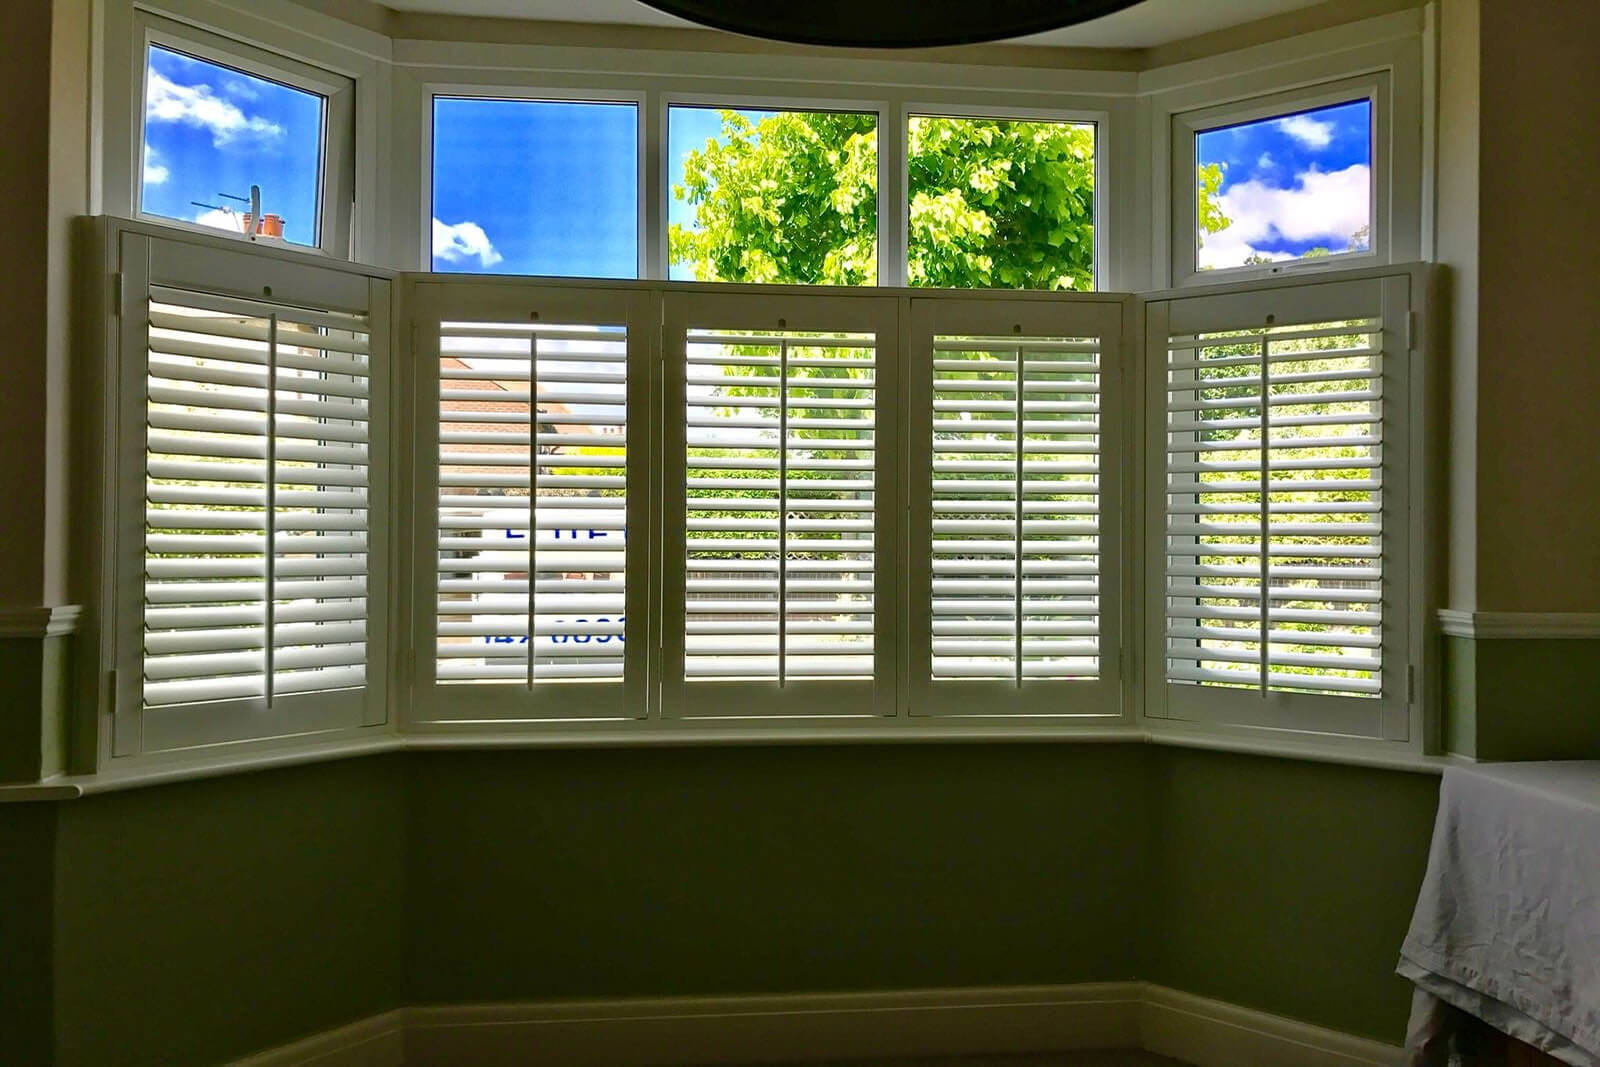 Suppliers of Stylish Plantation Shutters For Windows UK